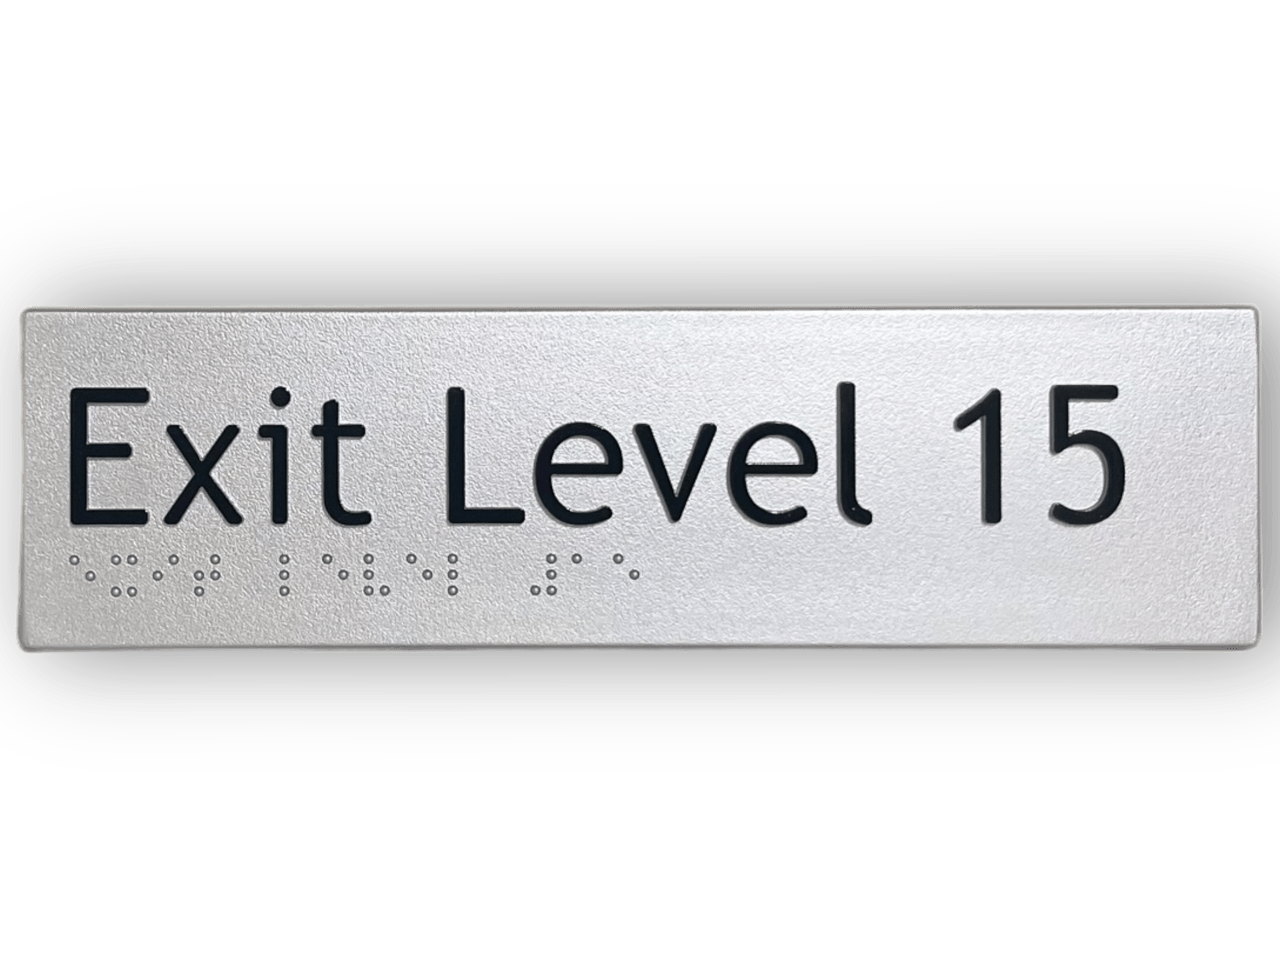 BRAILLE EXIT LEVEL 15 SIGN